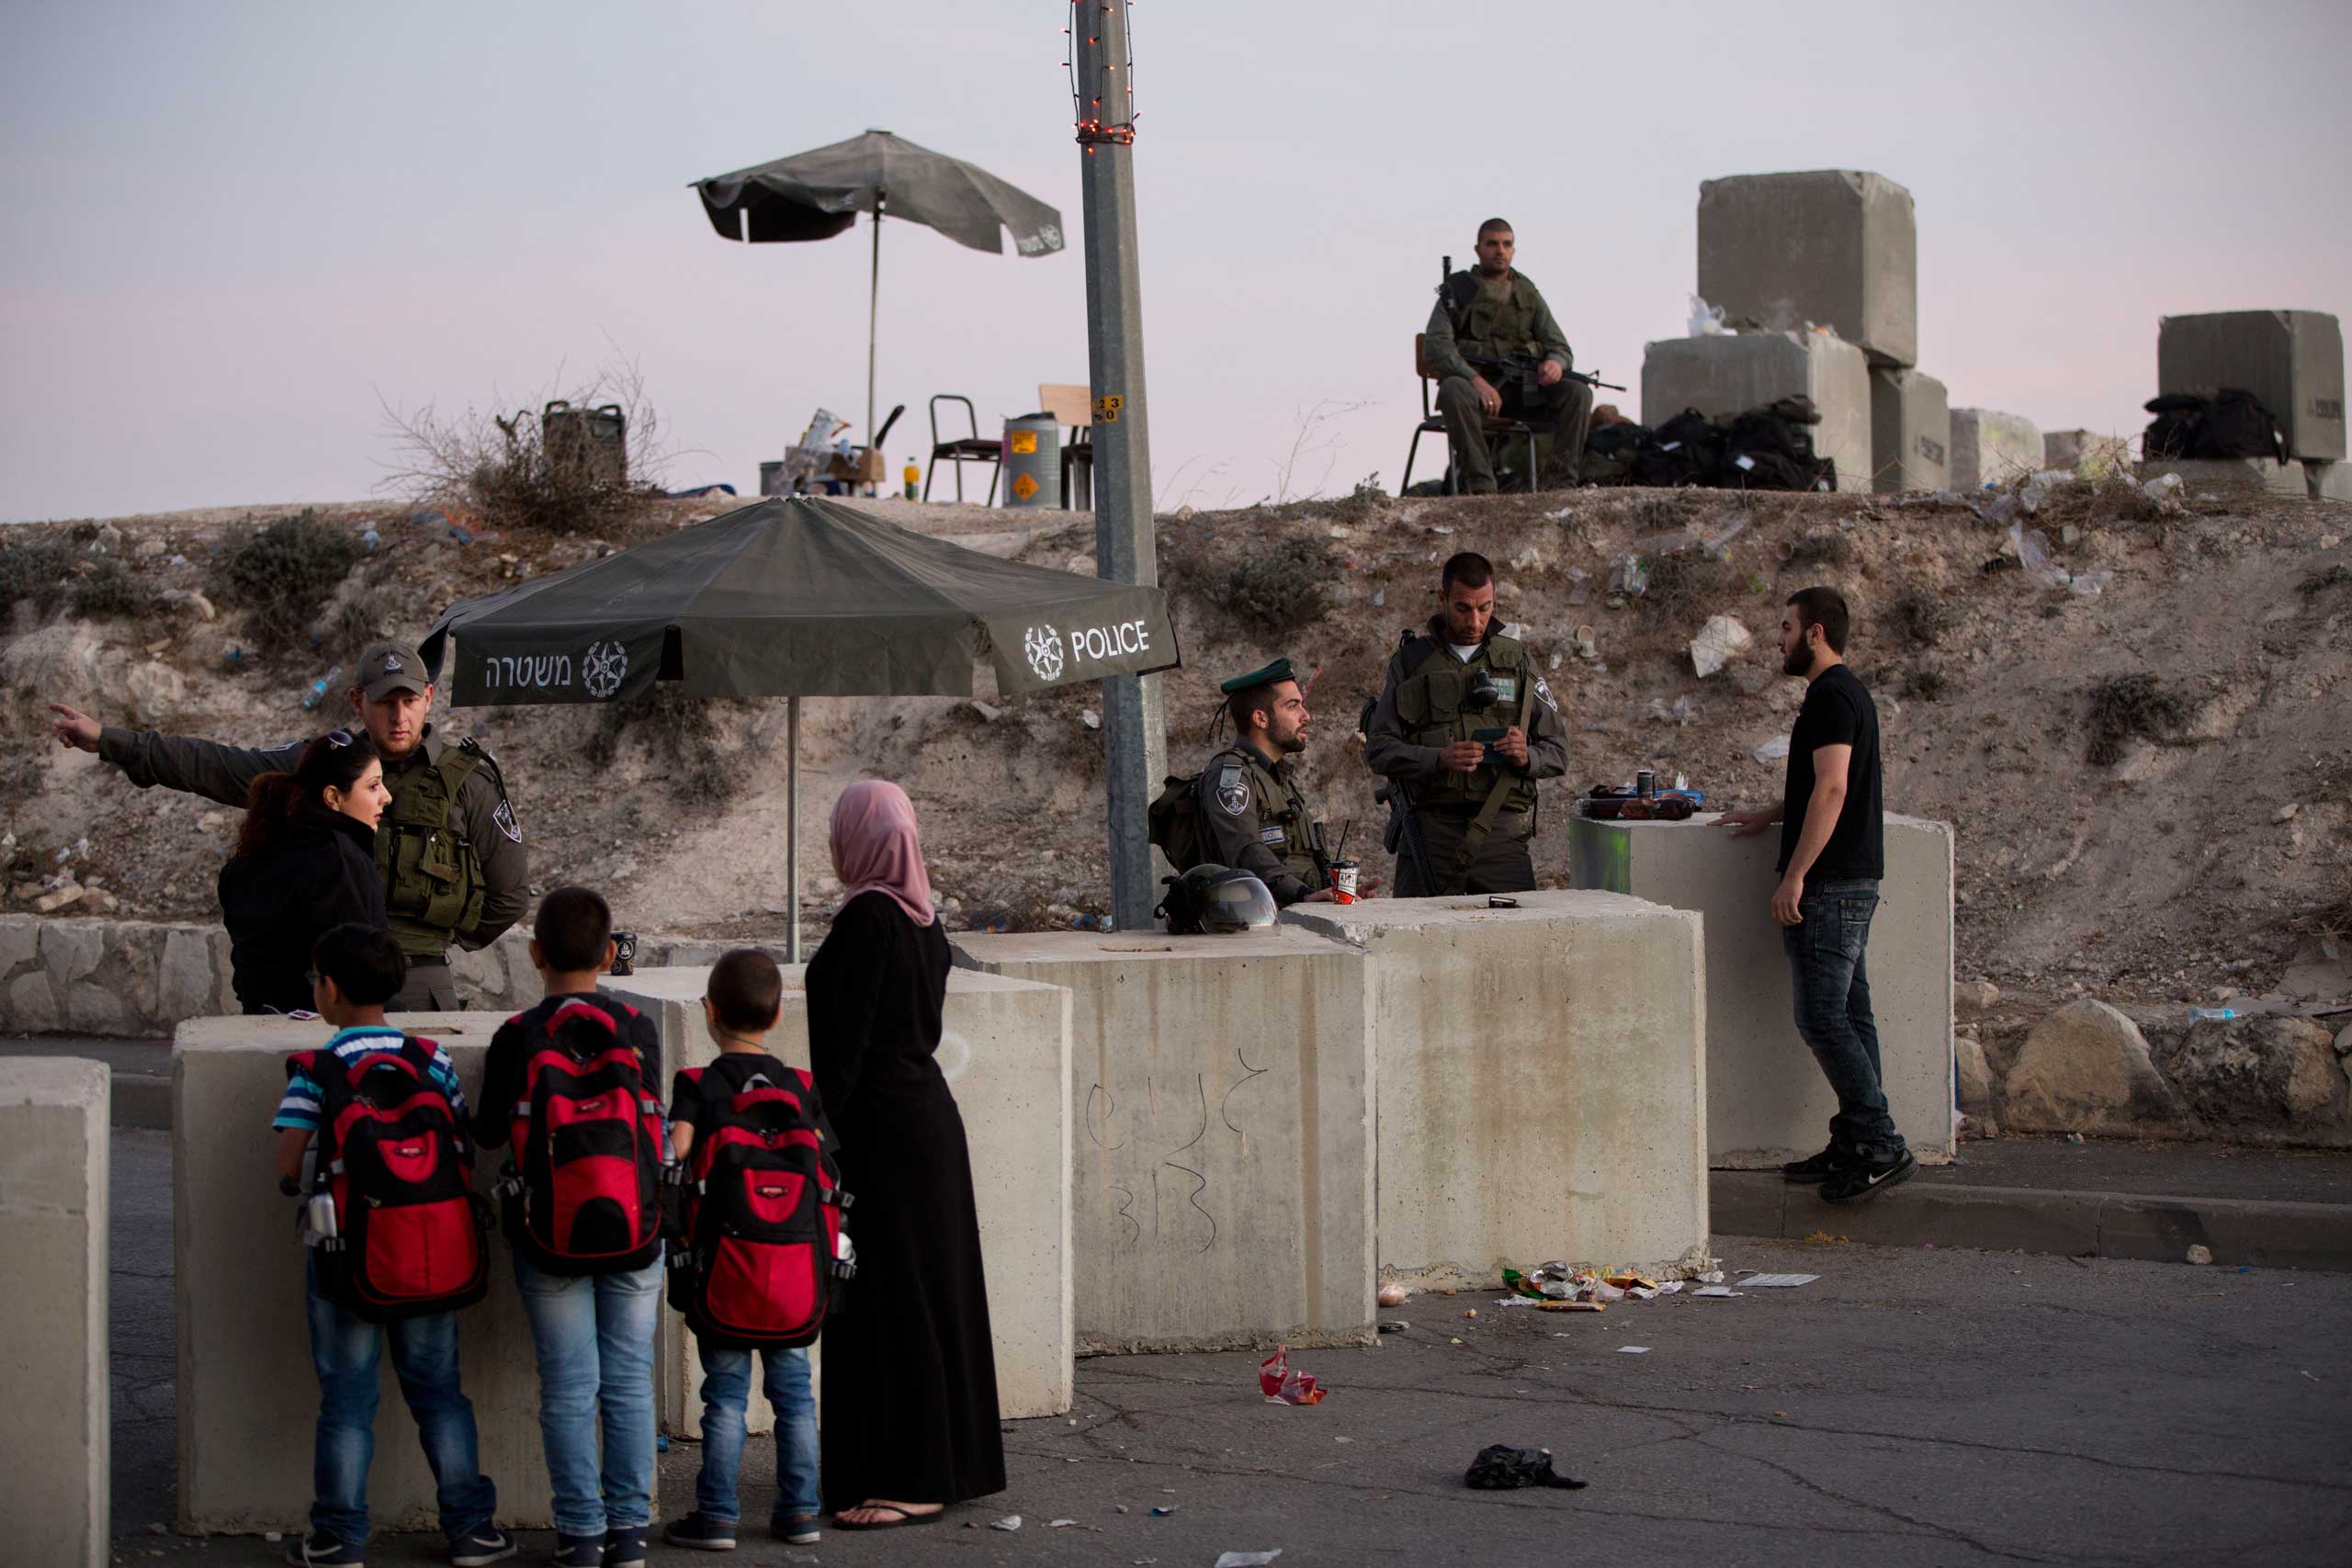 Israeli border police check Palestinian's identification cards at a checkpoint as they exit the Arab neighborhood of Issawiyeh in Jerusalem, on Oct. 22, 2015. (Oded Balilty—AP)